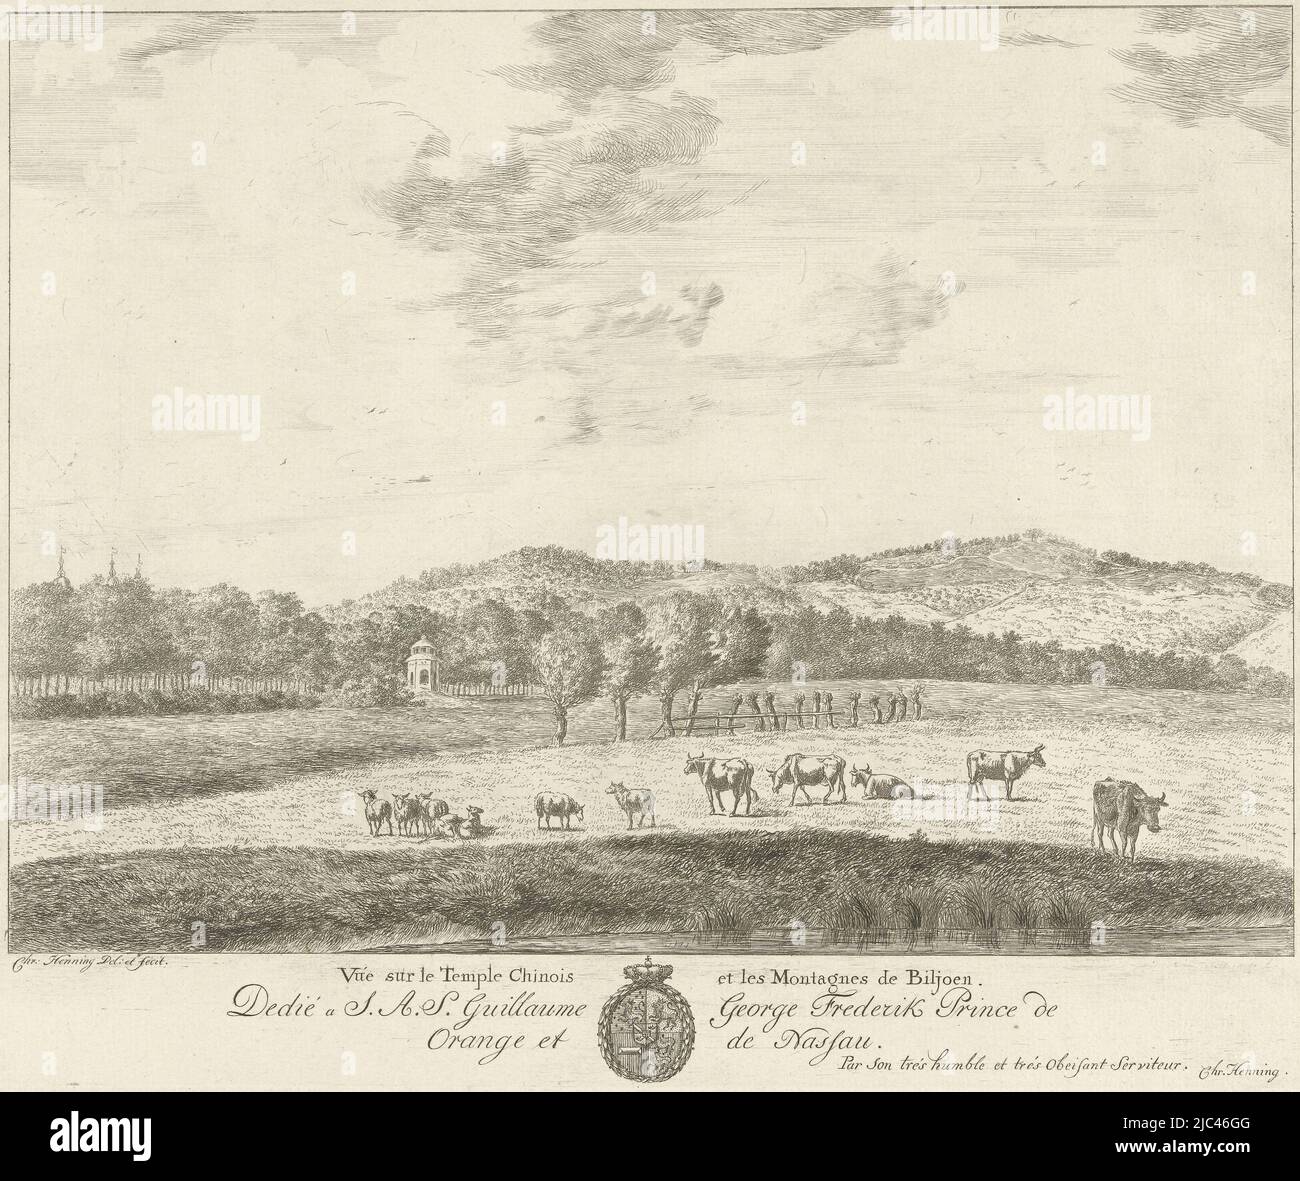 View of a meadow with cows and sheep in the foreground near a waterfront. To the left of the center of the landscape a garden house. Below the title, the coat of arms of Orange-Nassau and three lines in French, View of landscape Biljoen Ve sur le Temple Chinois et les Montagnes de Biljoen (title on object), print maker: Christian Henning, (mentioned on object), Christian Henning, (mentioned on object), Willem George Frederik (prins van Oranje-Nassau), (mentioned on object), Northern Netherlands, 15-Feb-1774 - 6-Jan-1799, paper, etching, h 299 mm × w 372 mm Stock Photo